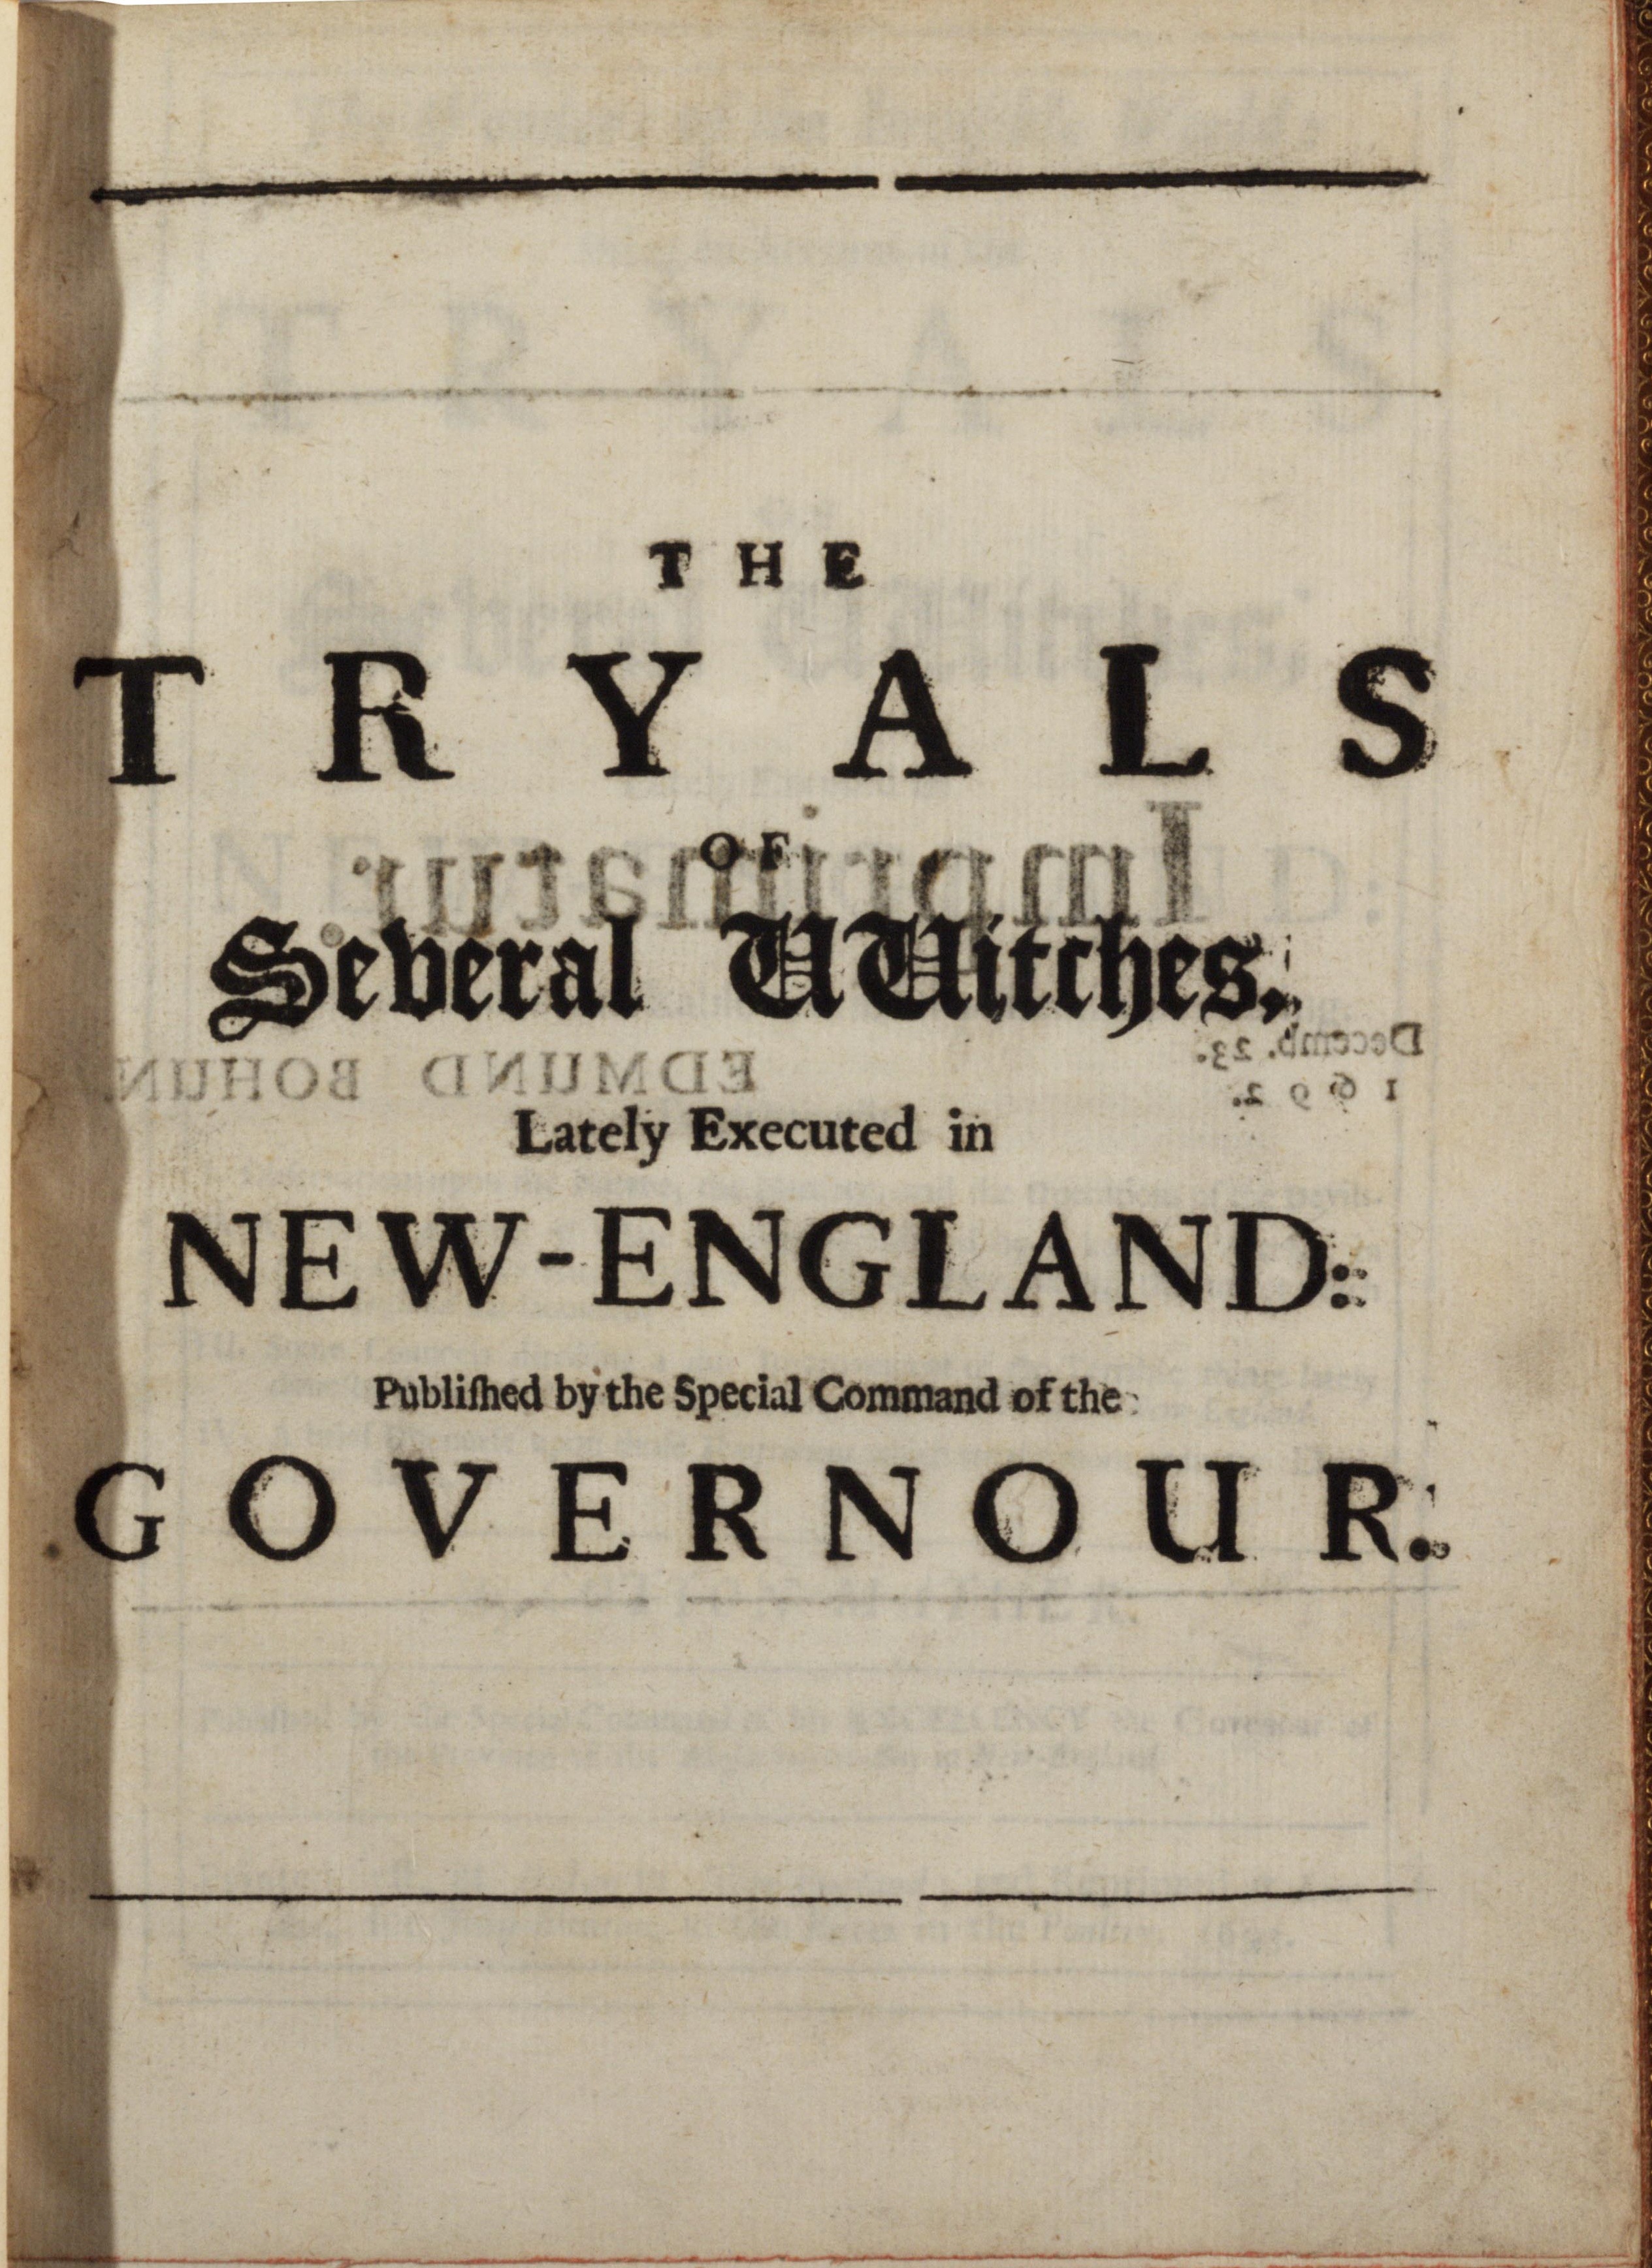 Puritans and the salem witch trials essays about education